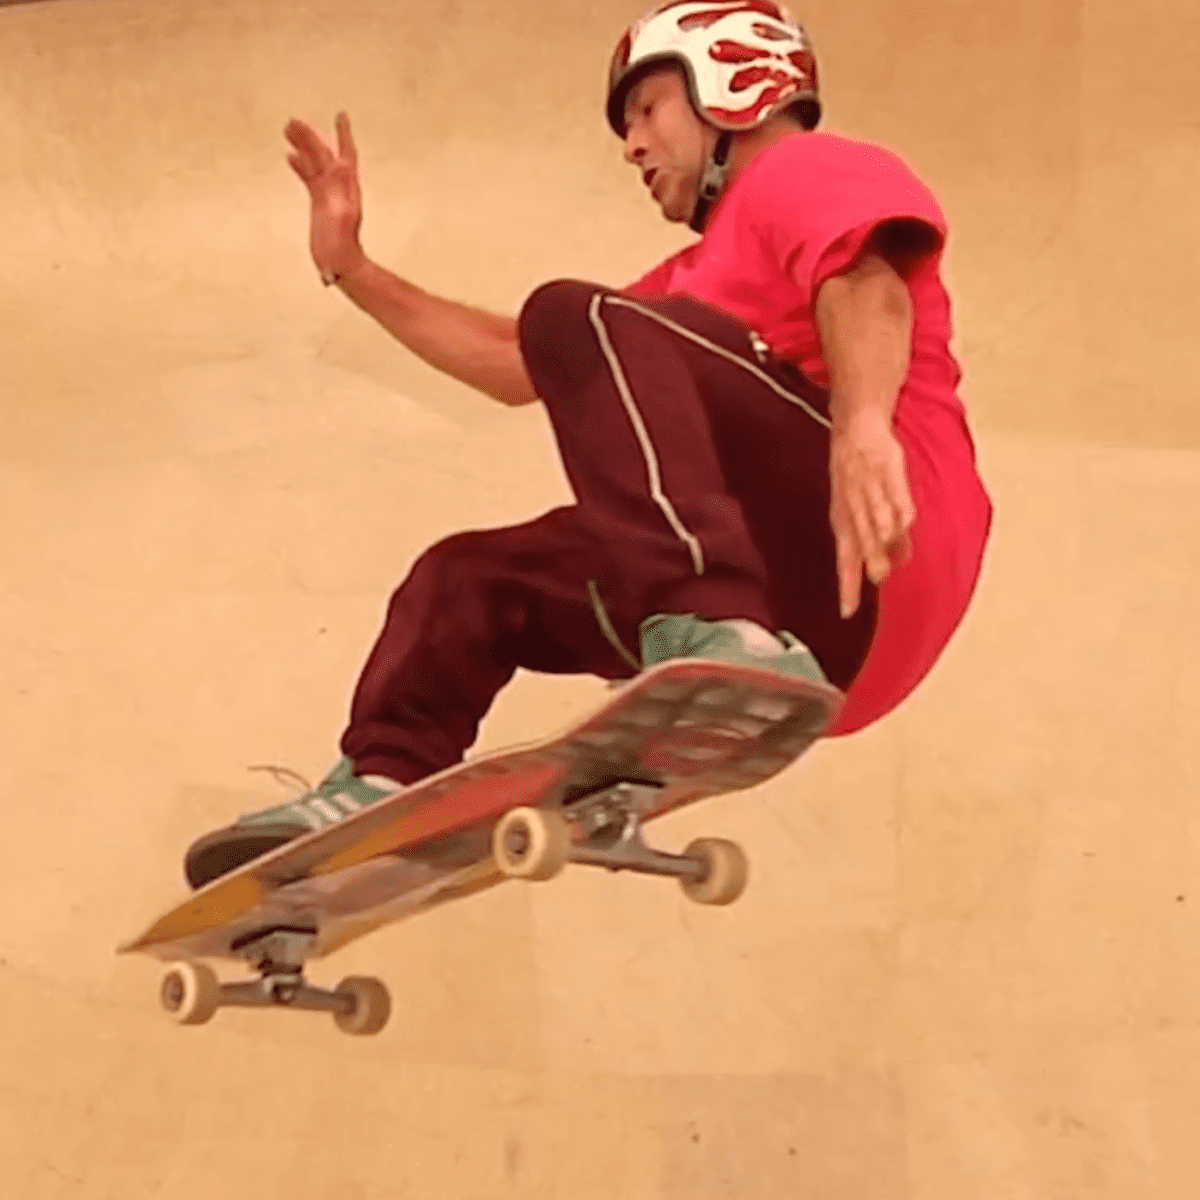 Mark Gonzales, still ripping at age 55 in new Supreme footage 